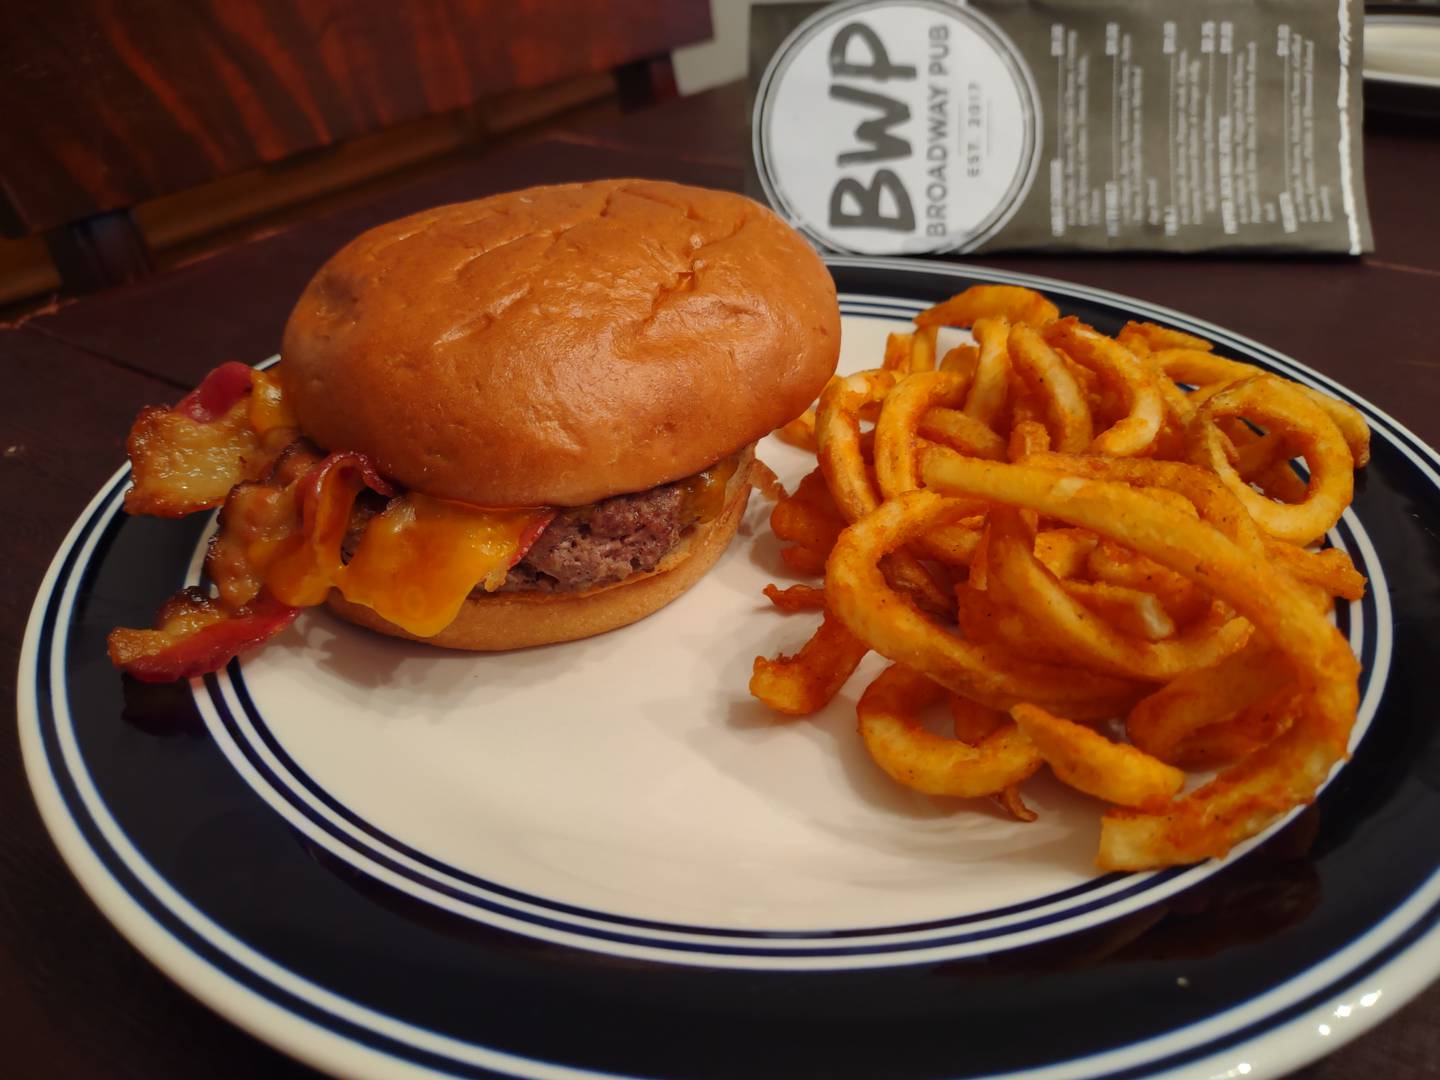 The Broadway burger at Broadway Pub in Streator is a 6-ounce patty made with your choice of cheese and toppings, including bacon for $2.